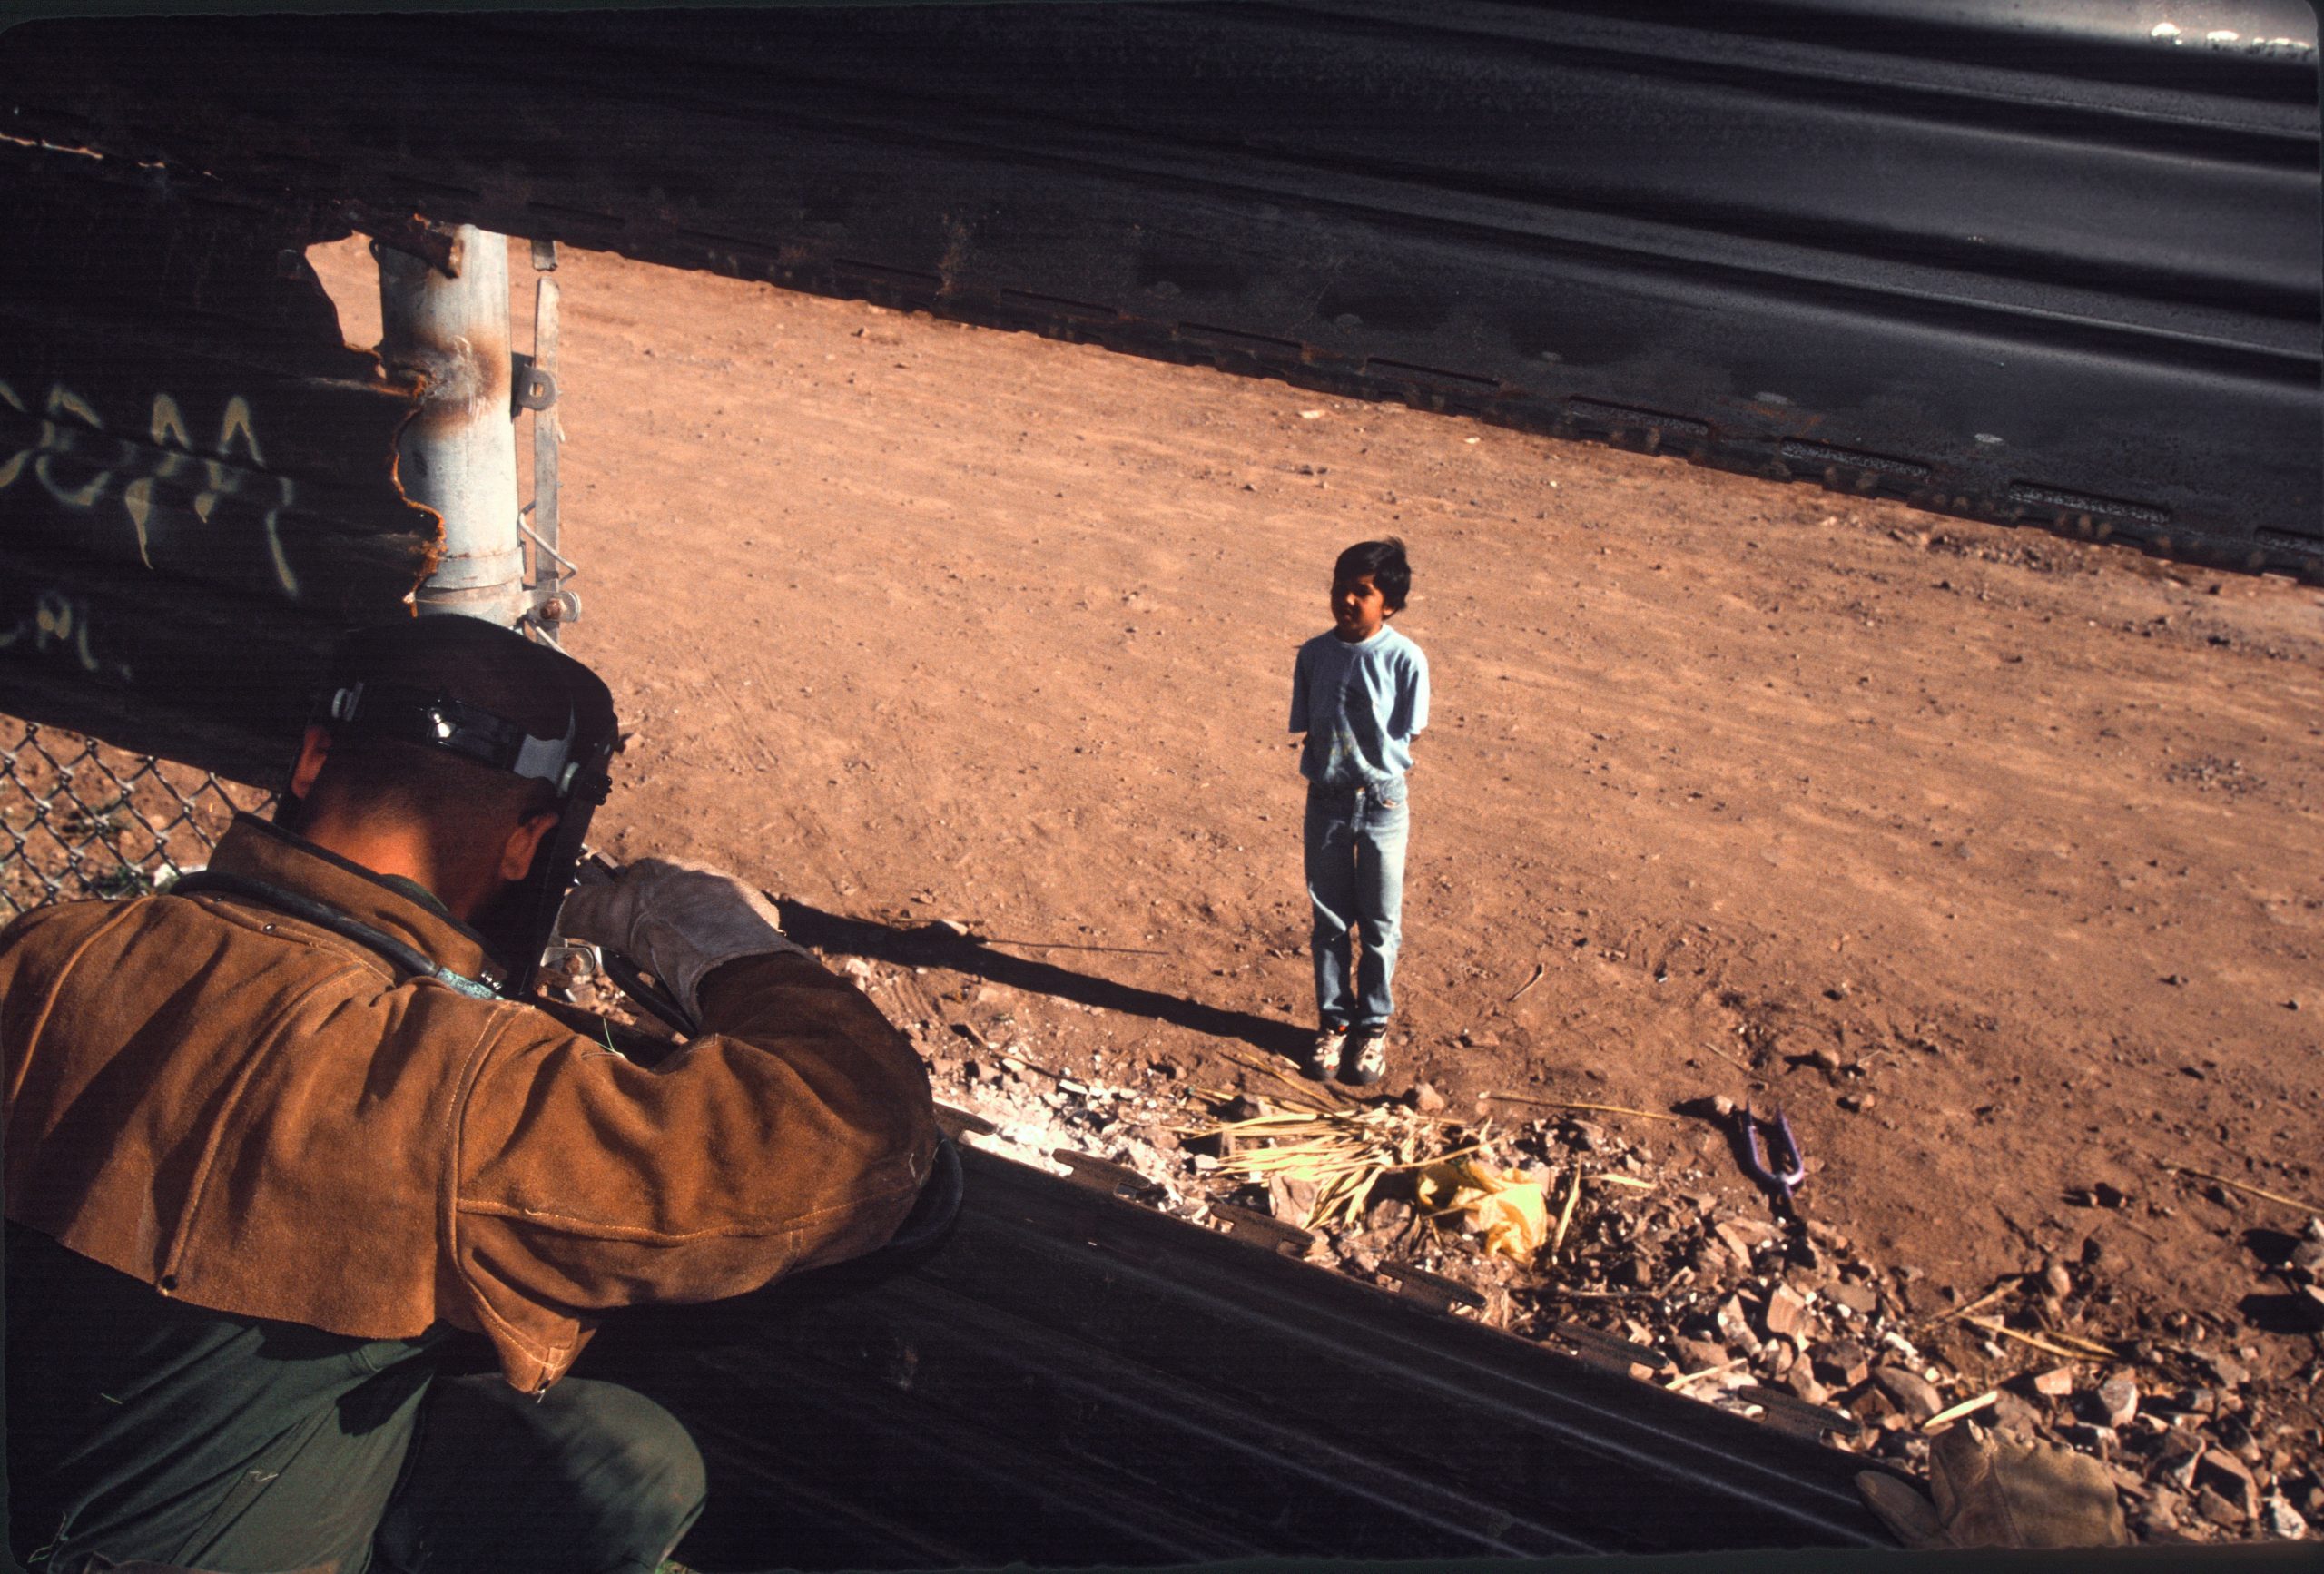 NOGALES, AZ - APRIL 10: United States army engineers extend a border wall as a Mexican boy on the other side watches on April 10, 1995 on the outskirts of Nogales, Arizona.(Photo by Andrew Lichtenstein/Corbis via Getty Images)